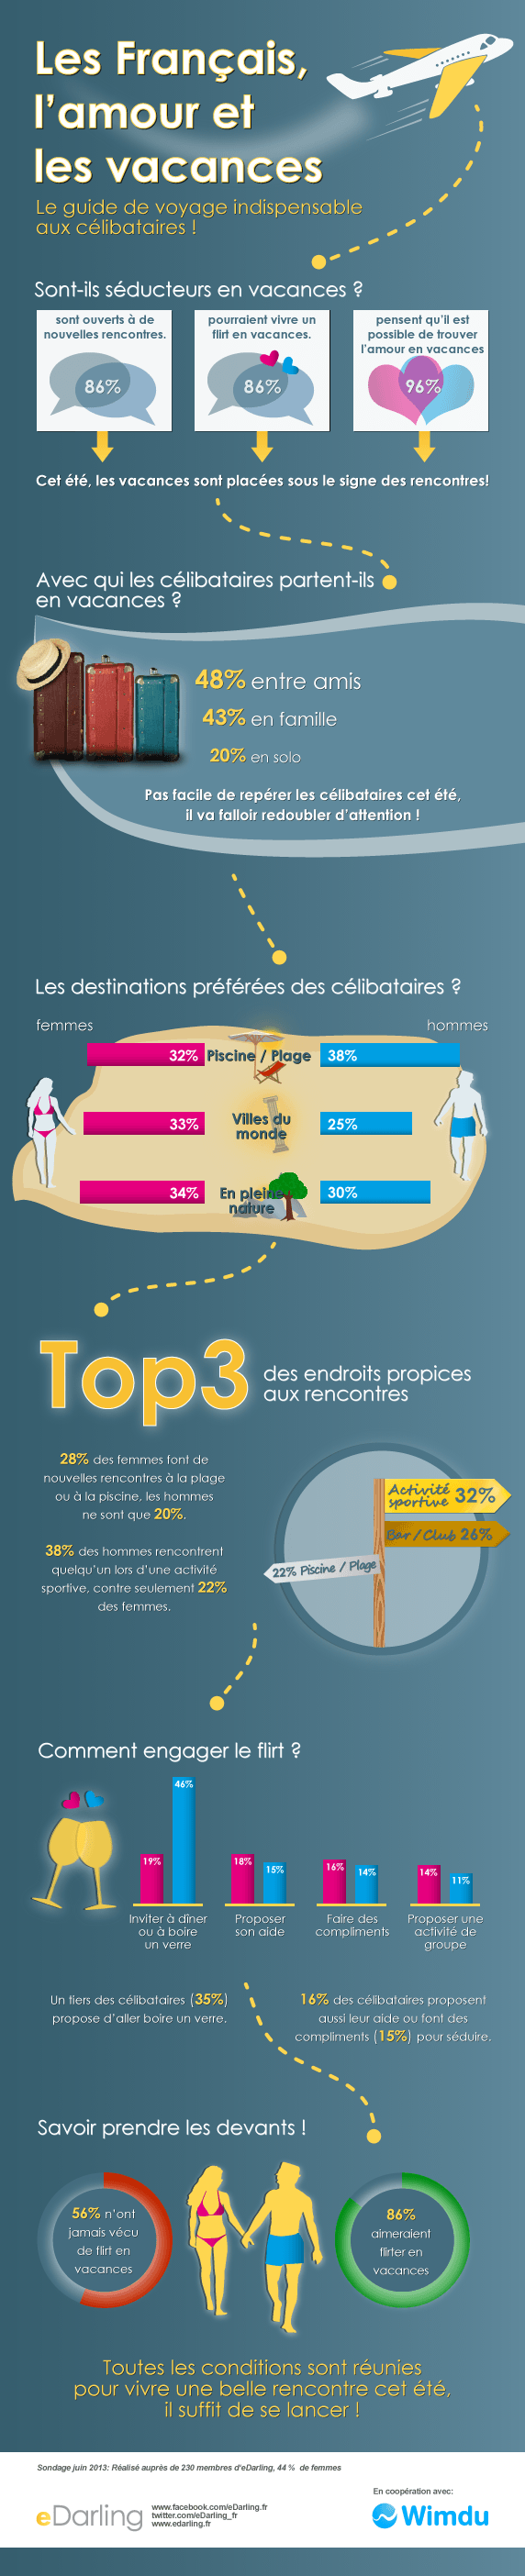 infographic_singles_on_vacation_FR